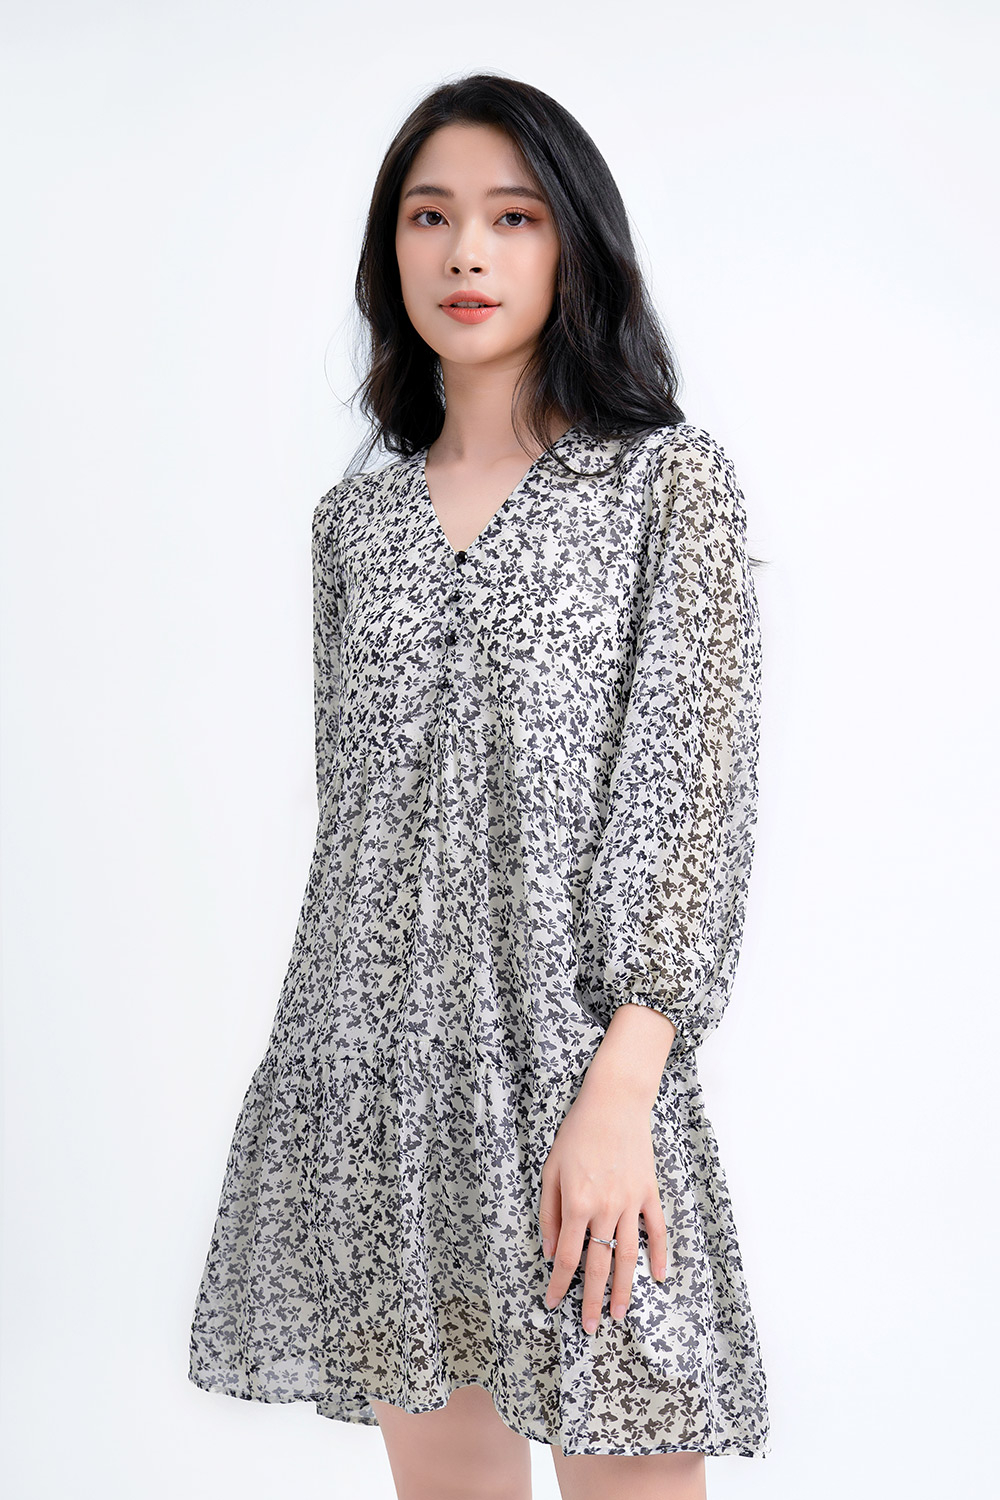 VÁY BABYDOLL TRẮNG CỔ POLO / MADEBYMINT Mint Official